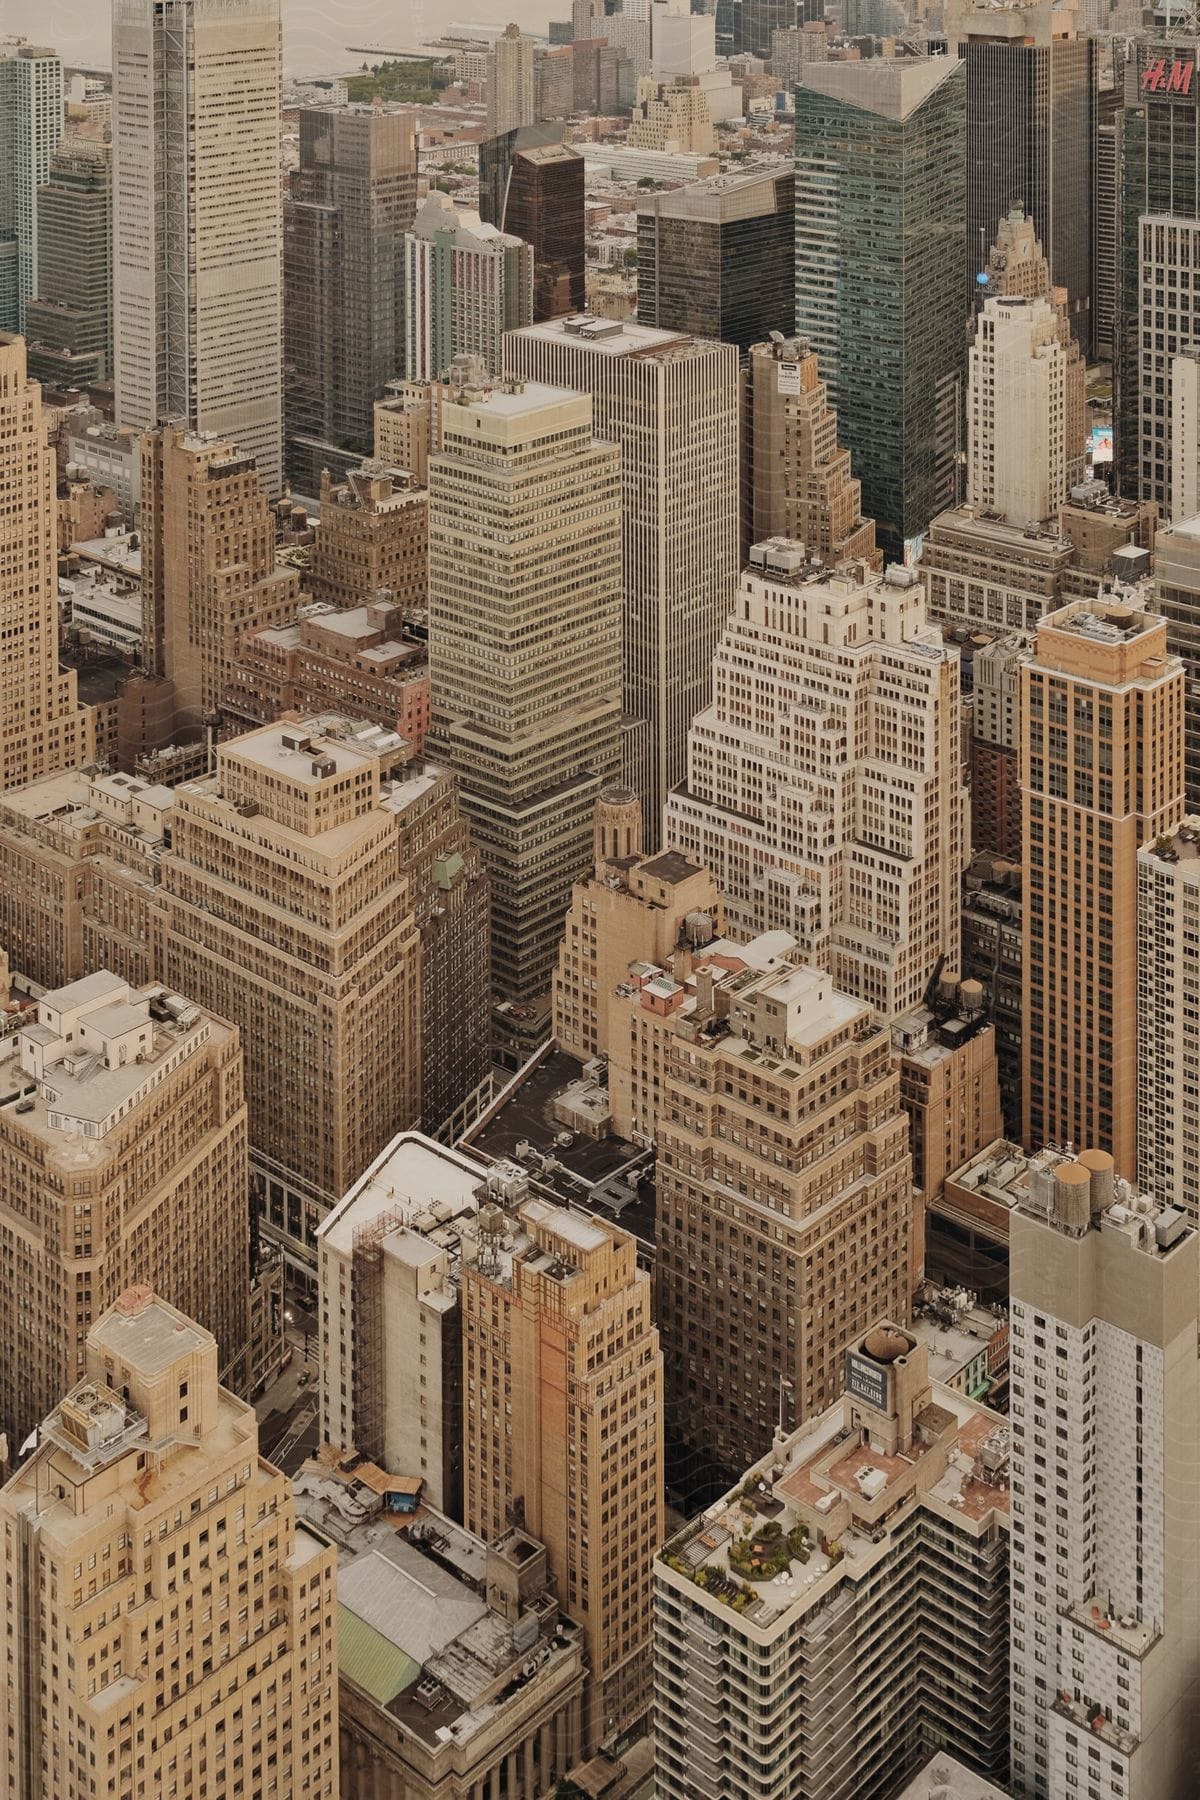 Aerial view of tall city buildings with small windows and creamcolored facades